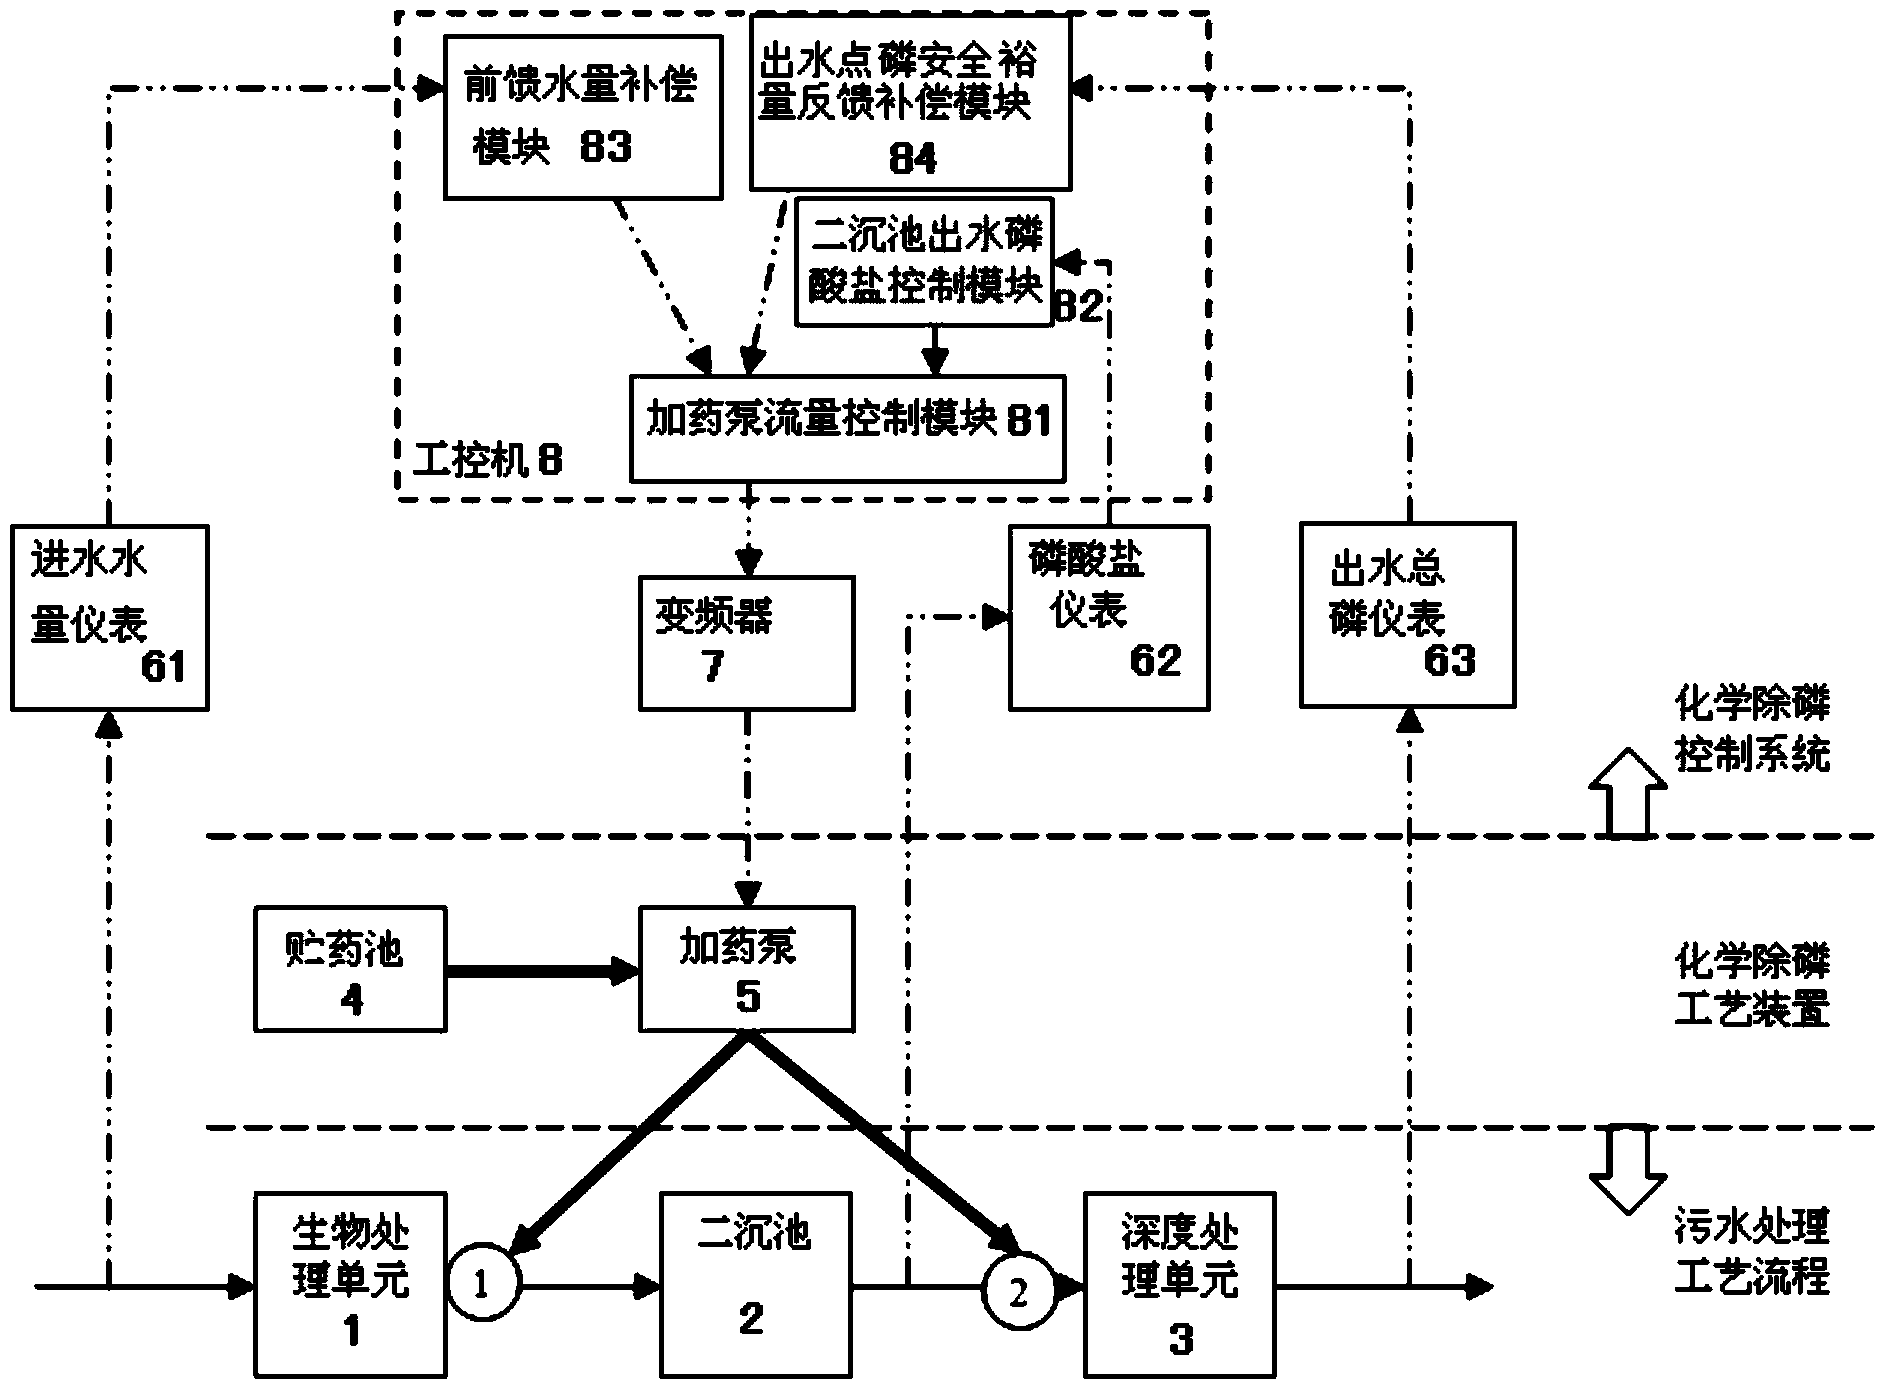 Optimization control device for chemical phosphorus removal process